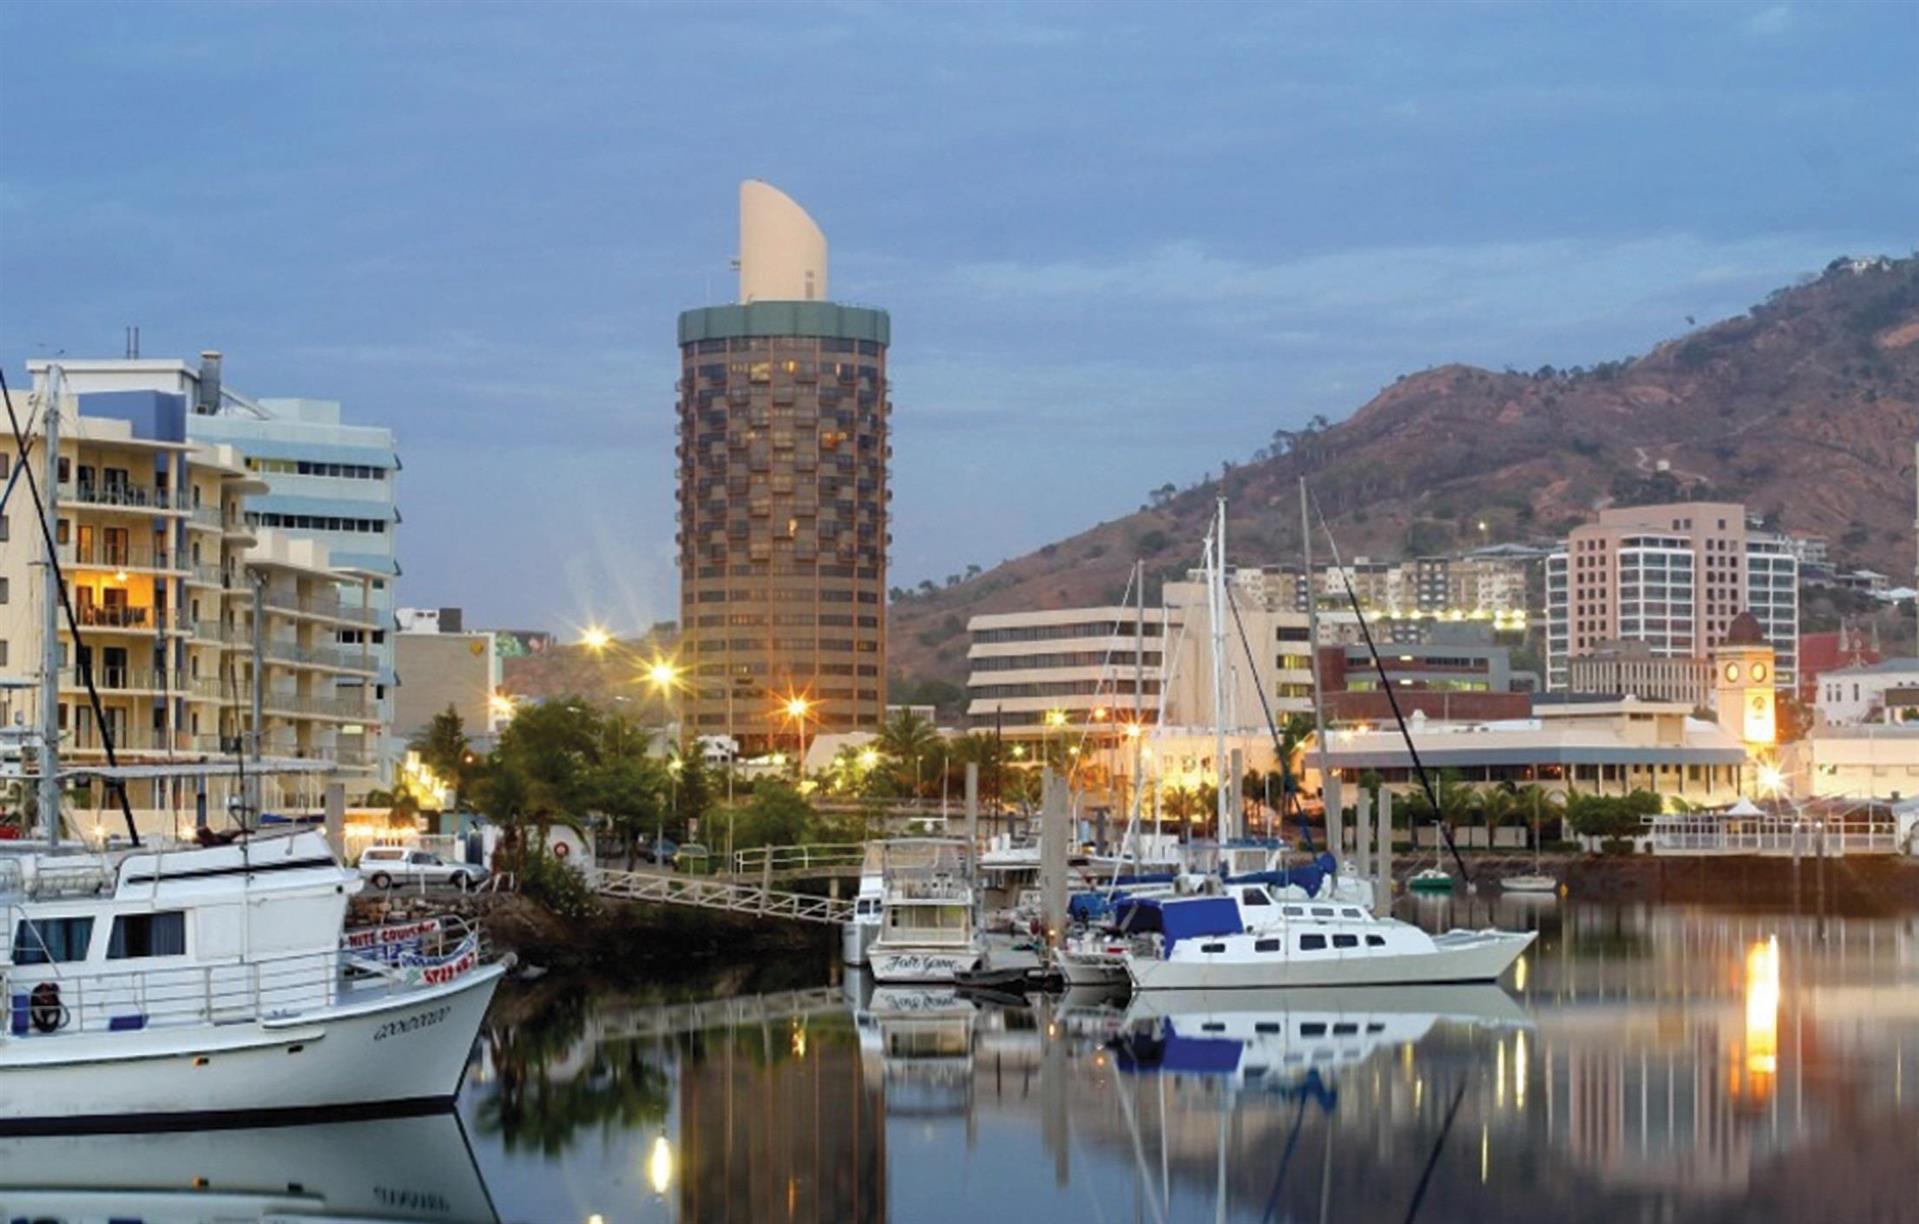 Hotel Grand Chancellor Townsville in Townsville, AU